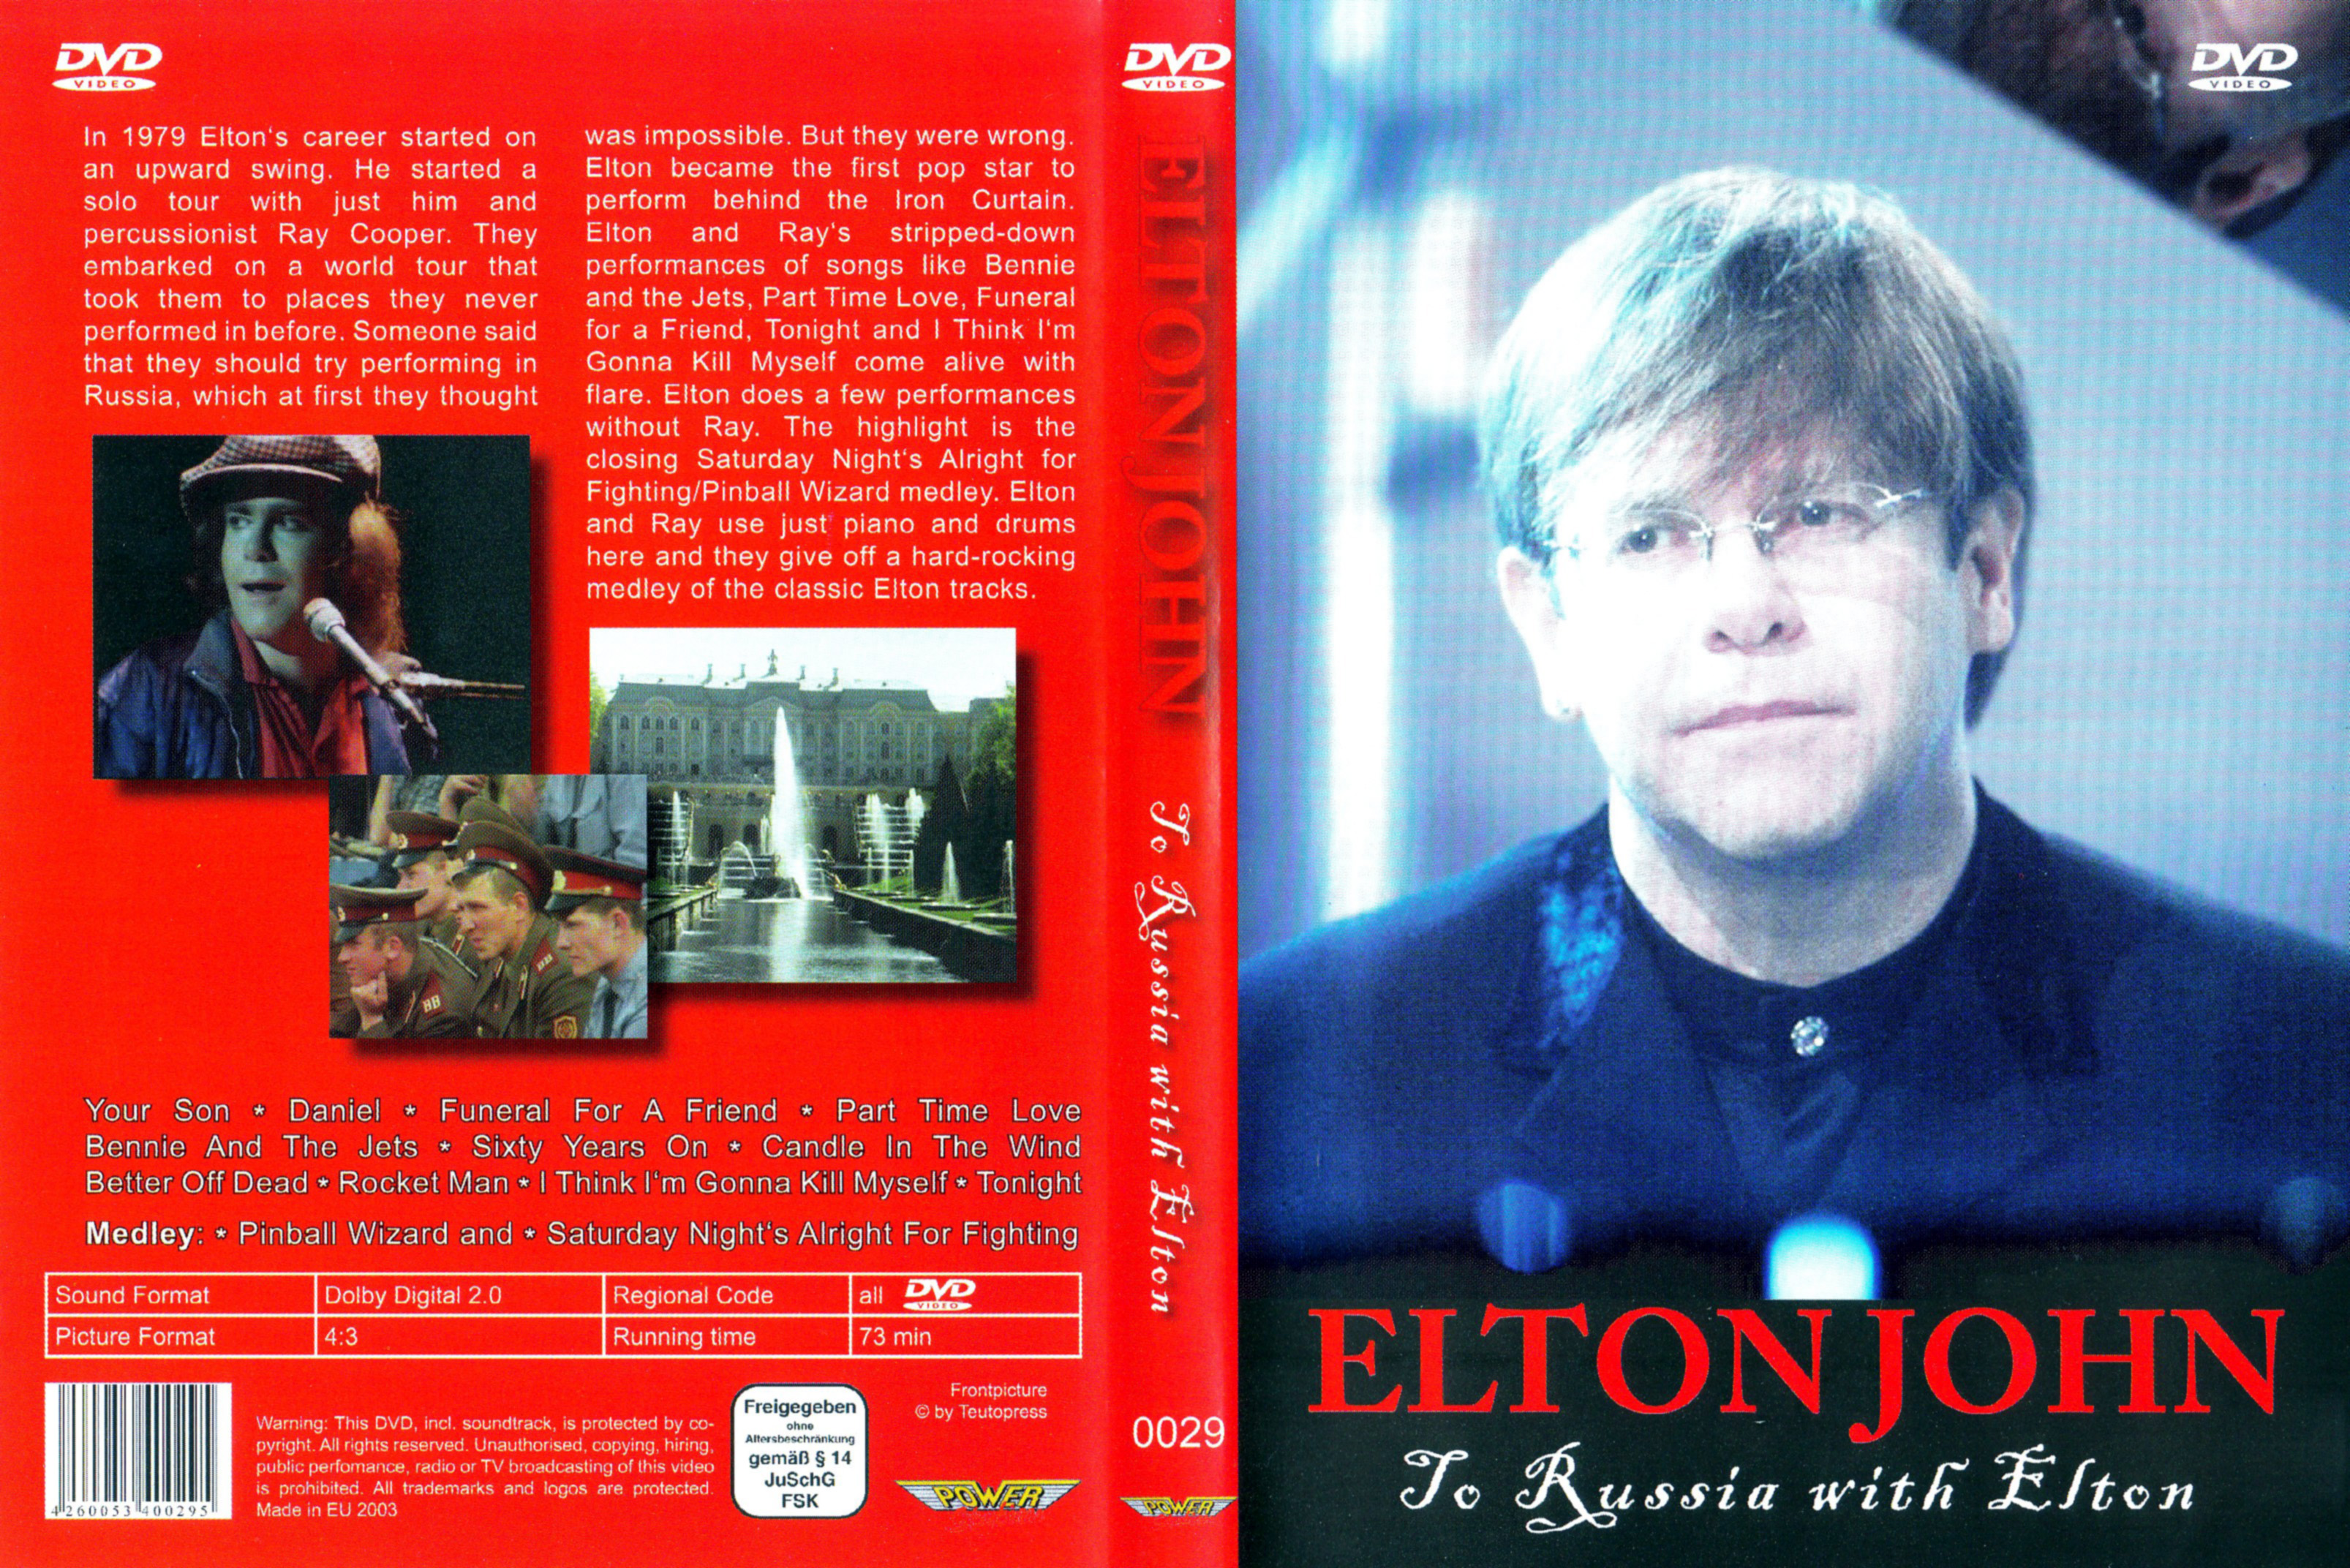 Jaquette DVD Elton John to Russia with Elton live in concert 1979 v2